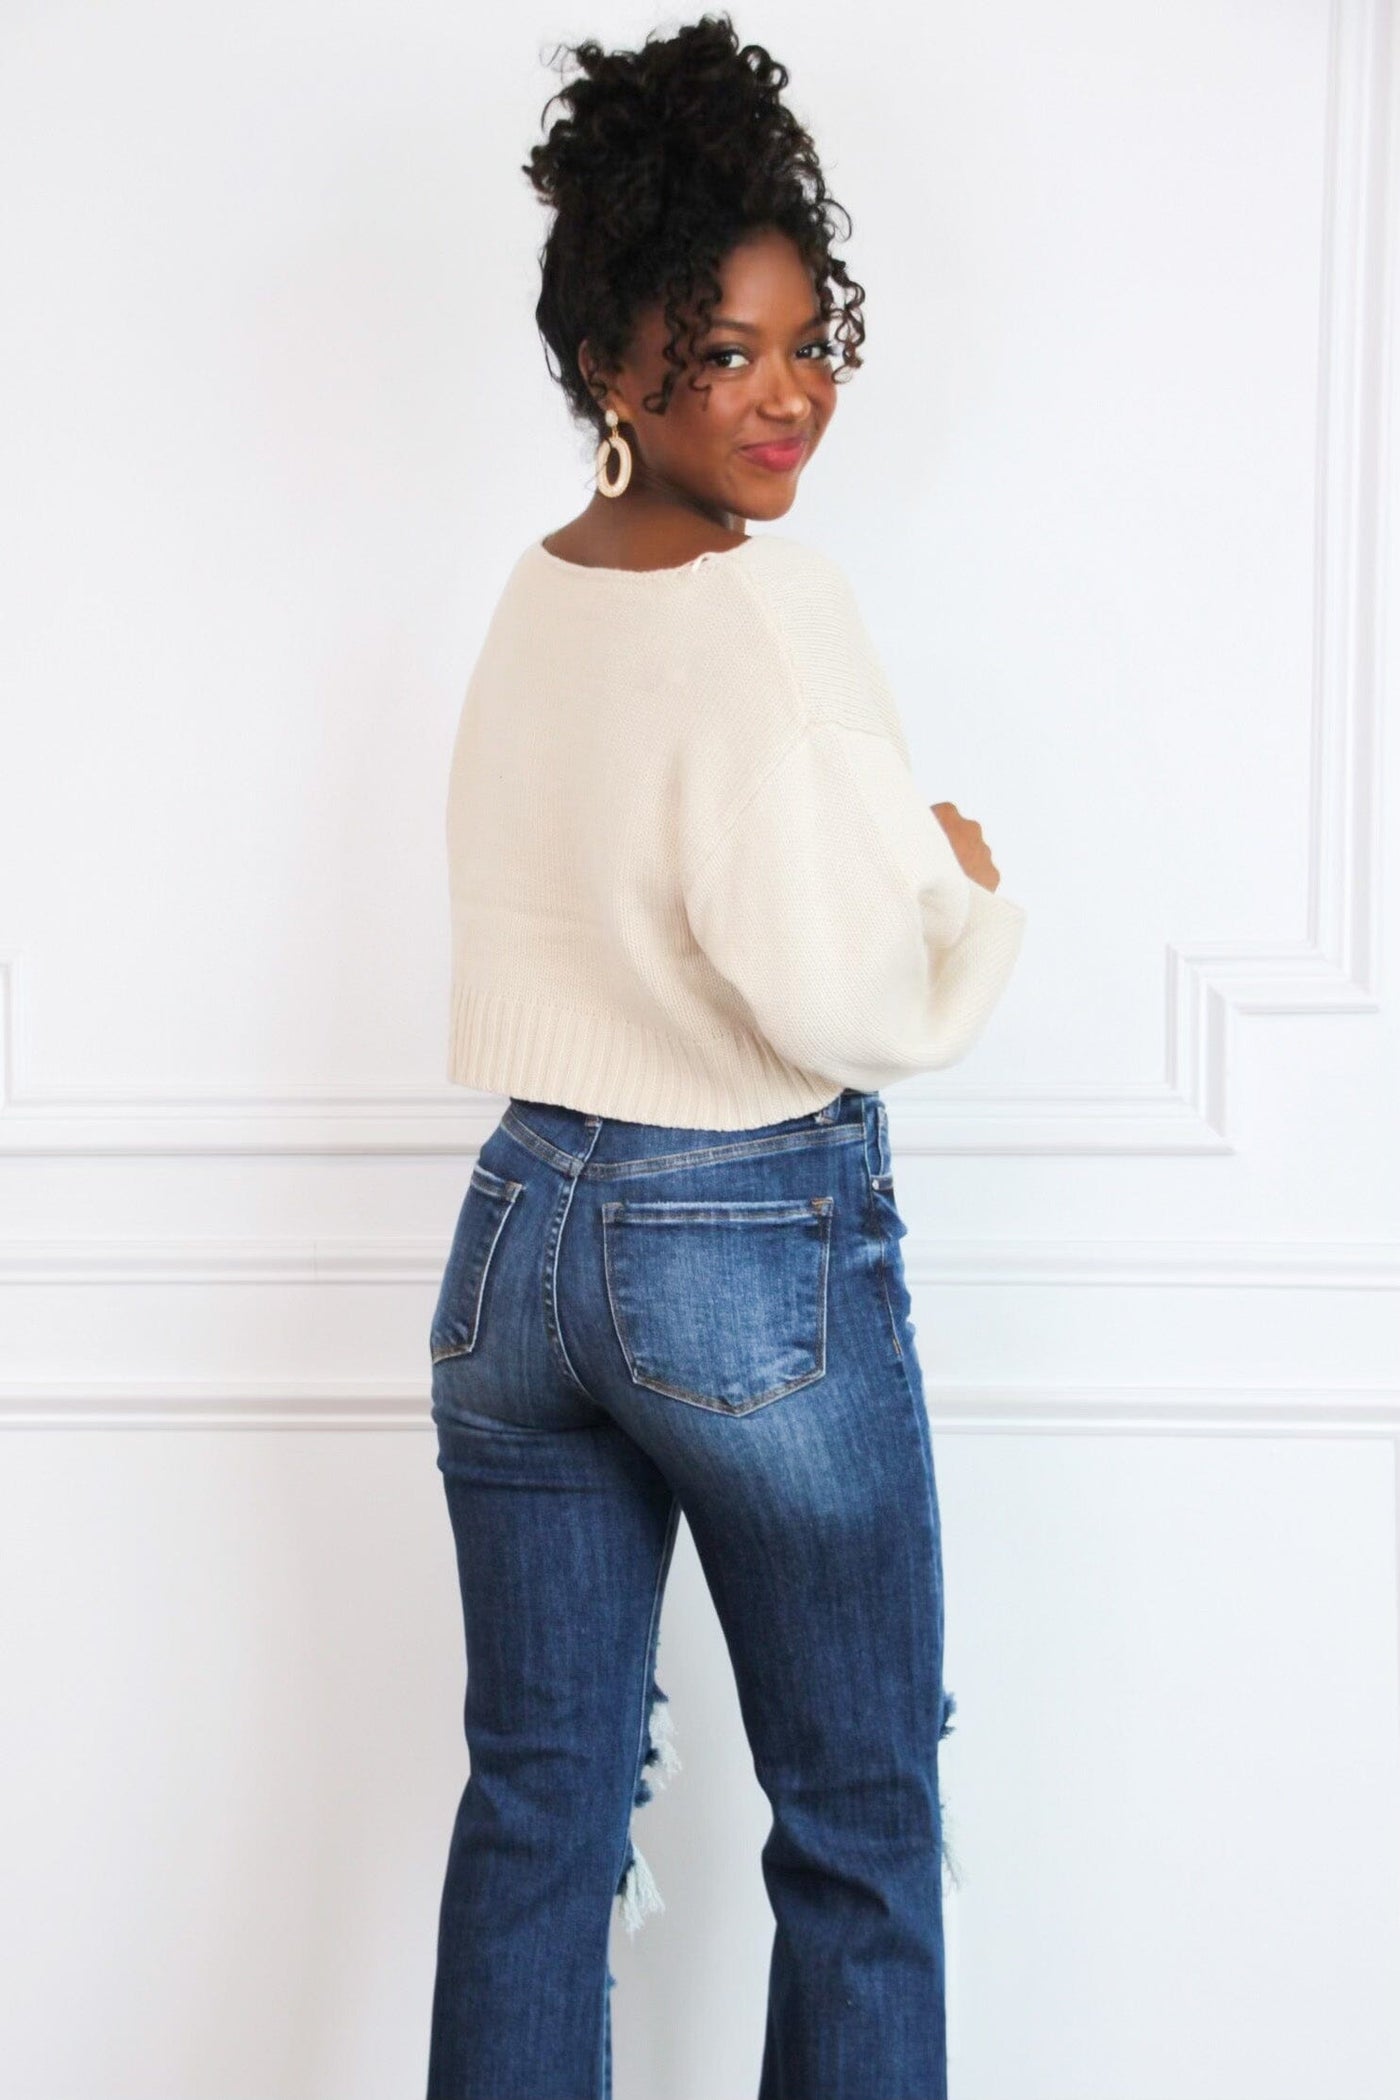 Bexley Cropped Sweater: Beige - Bella and Bloom Boutique